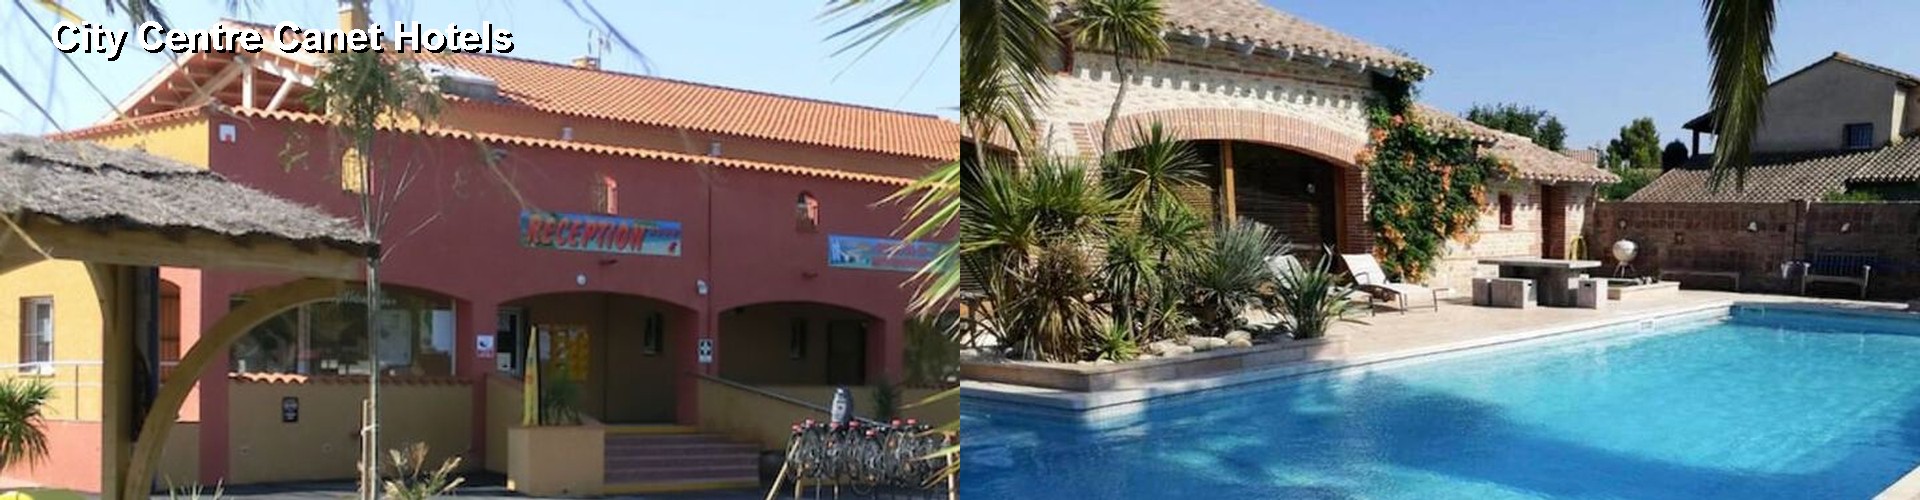 5 Best Hotels near City Centre Canet